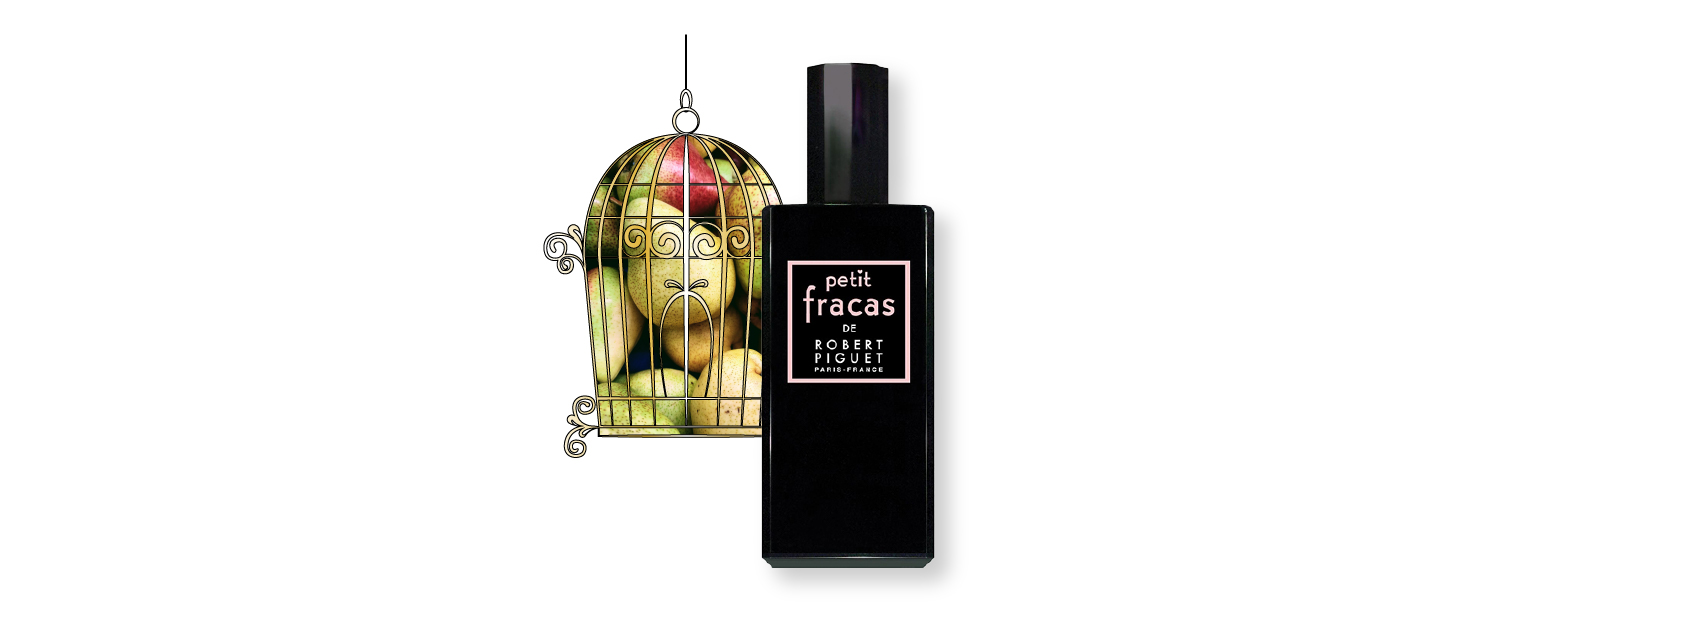 bottle of petit fracas by robert piguet with a photo of pears behind a gold cage